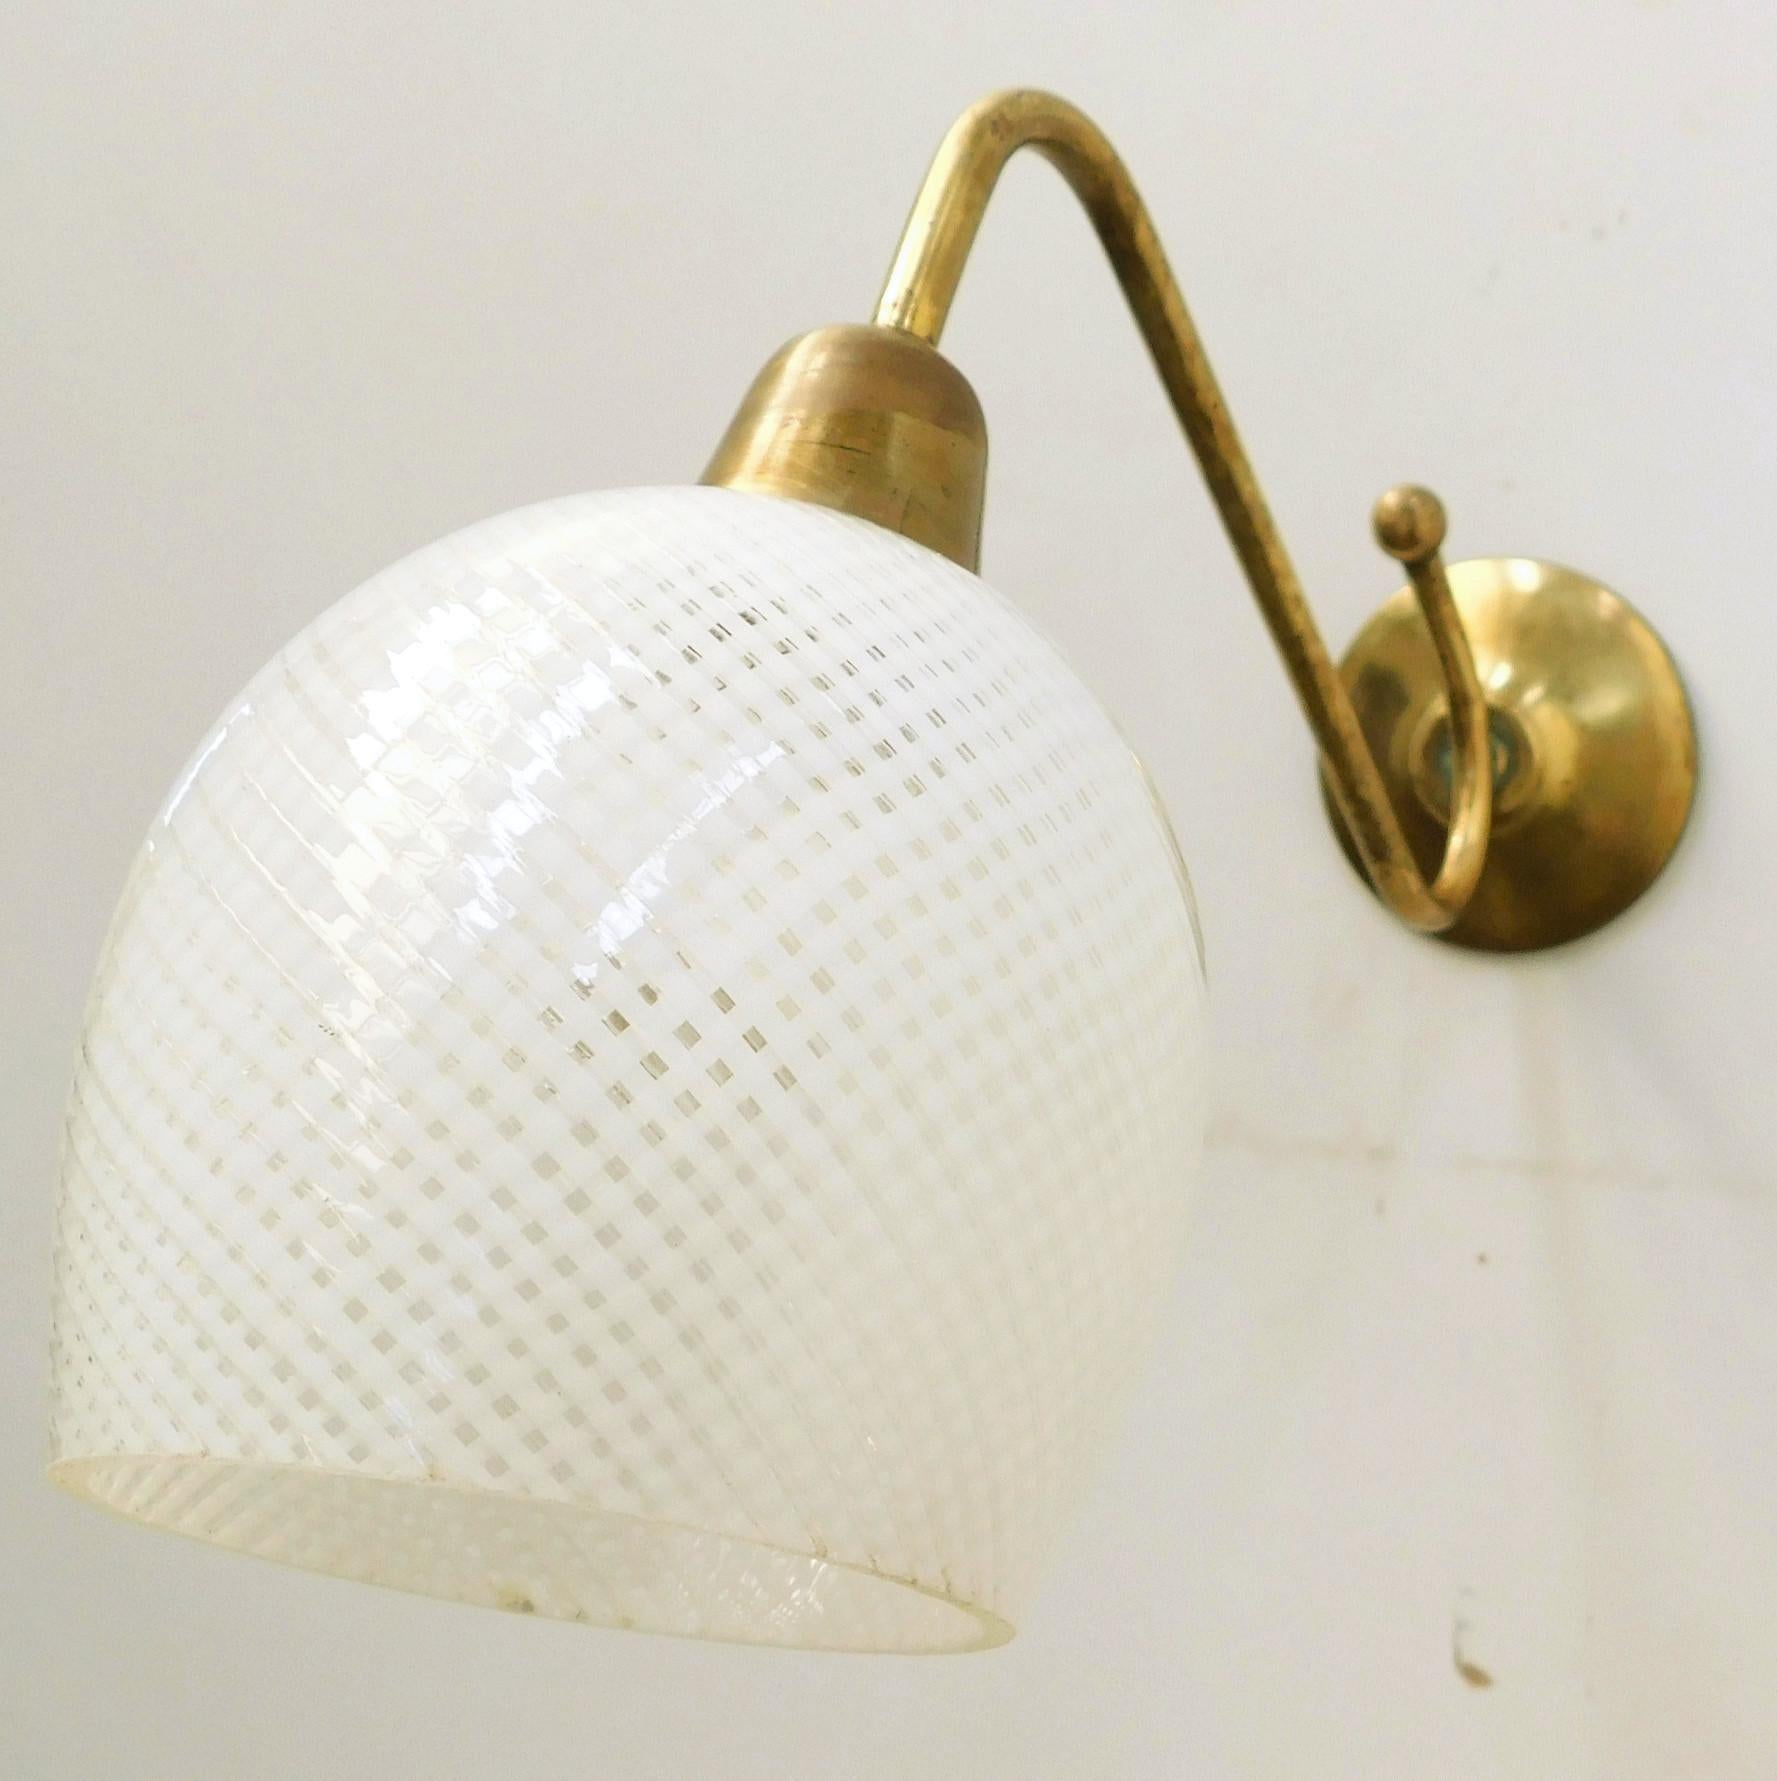 Original vintage Italian down lights with clear and white Murano glasses hand blown in an intricate textured pattern using Reticello technique, mounted on brass frames / Designed by Barovier e Toso, circa 1960s / Made in Italy
1 light / E12 or E14